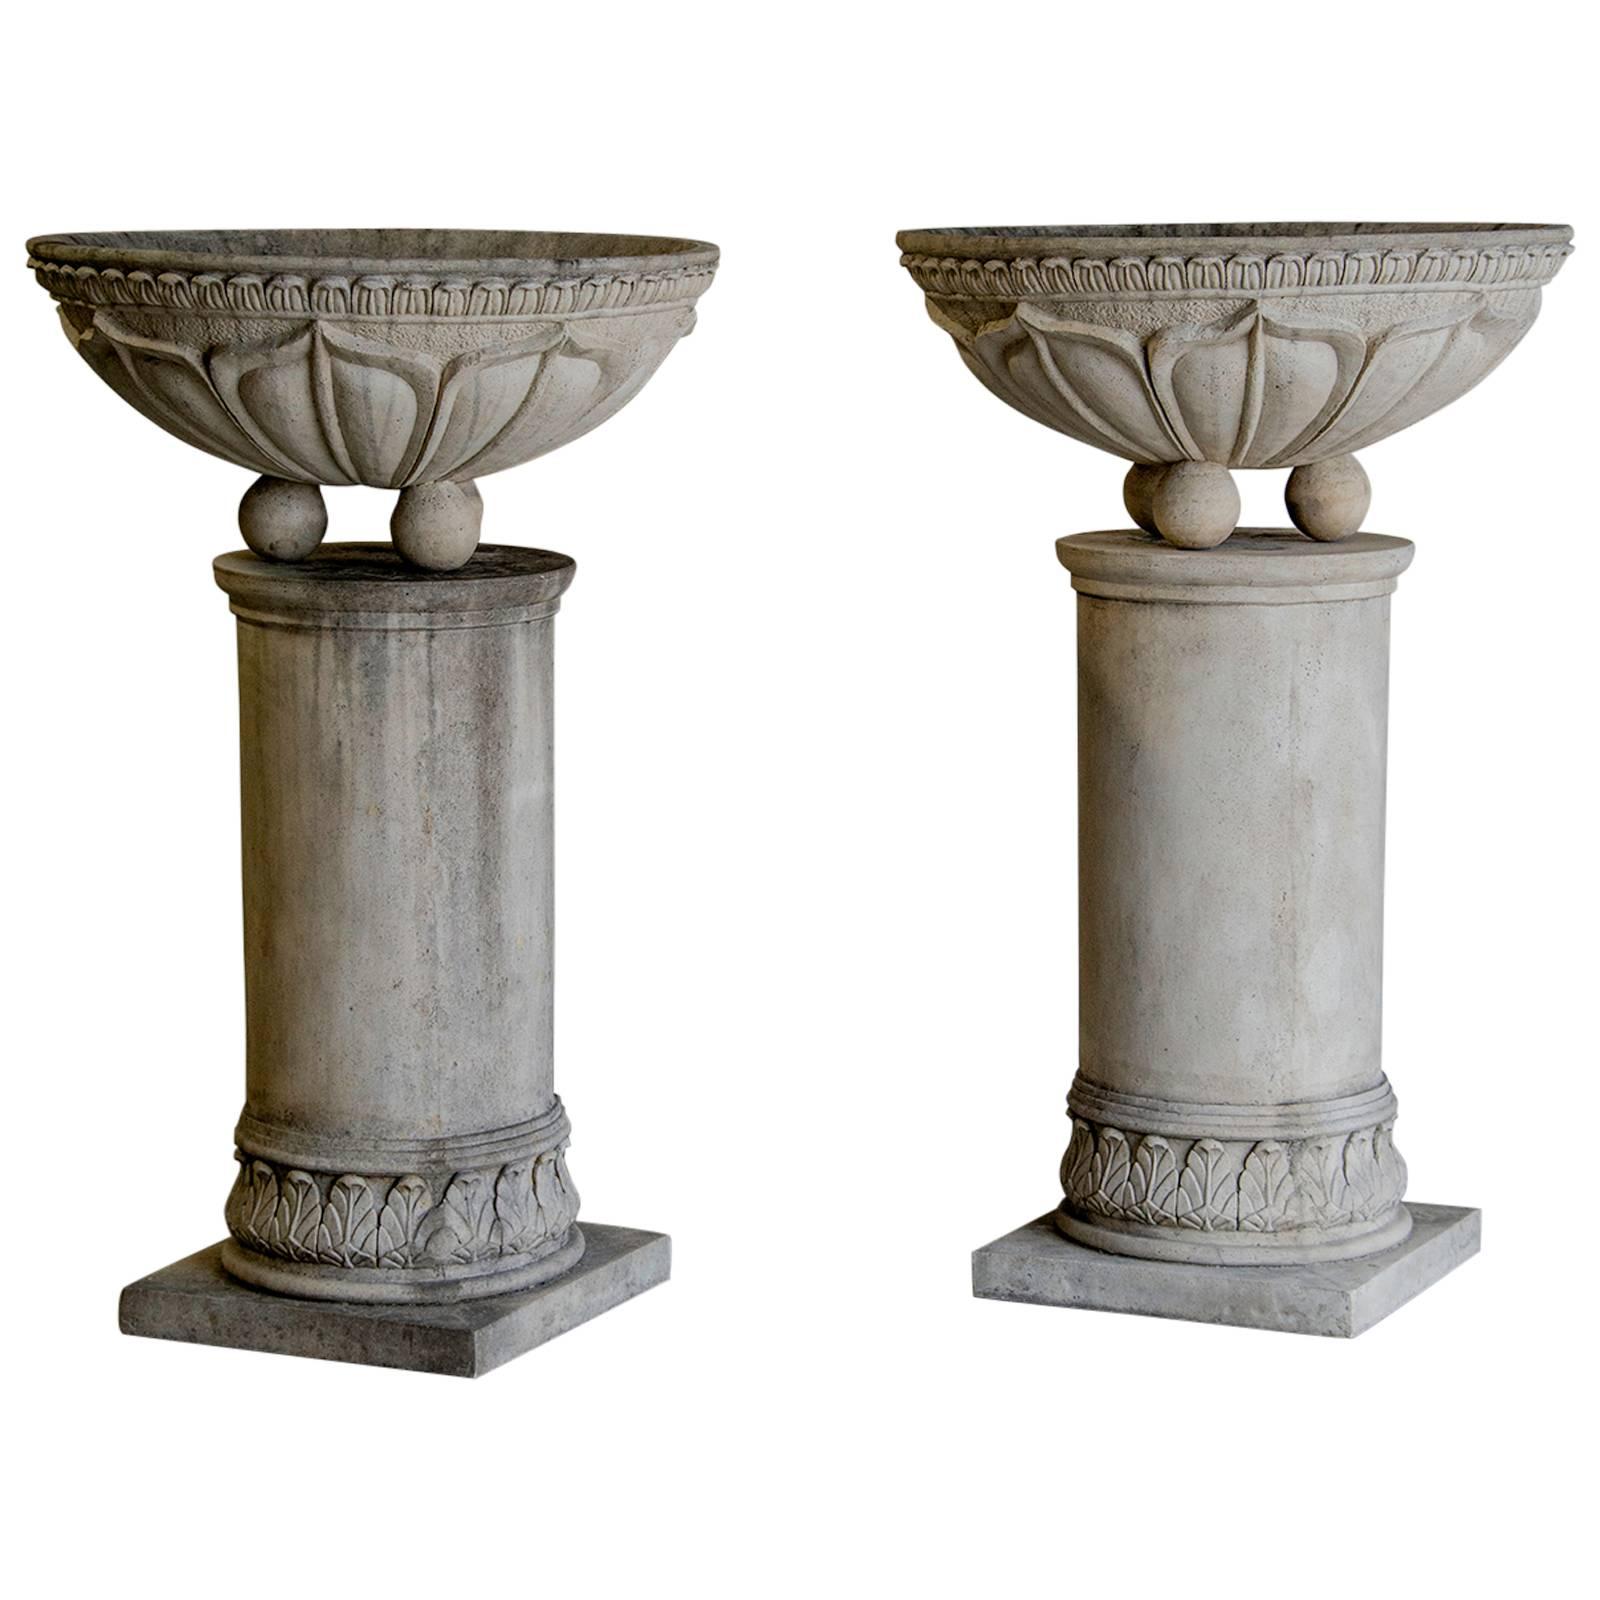 Pair of Vintage French Circular Basins Atop Columns, Relief Decoration